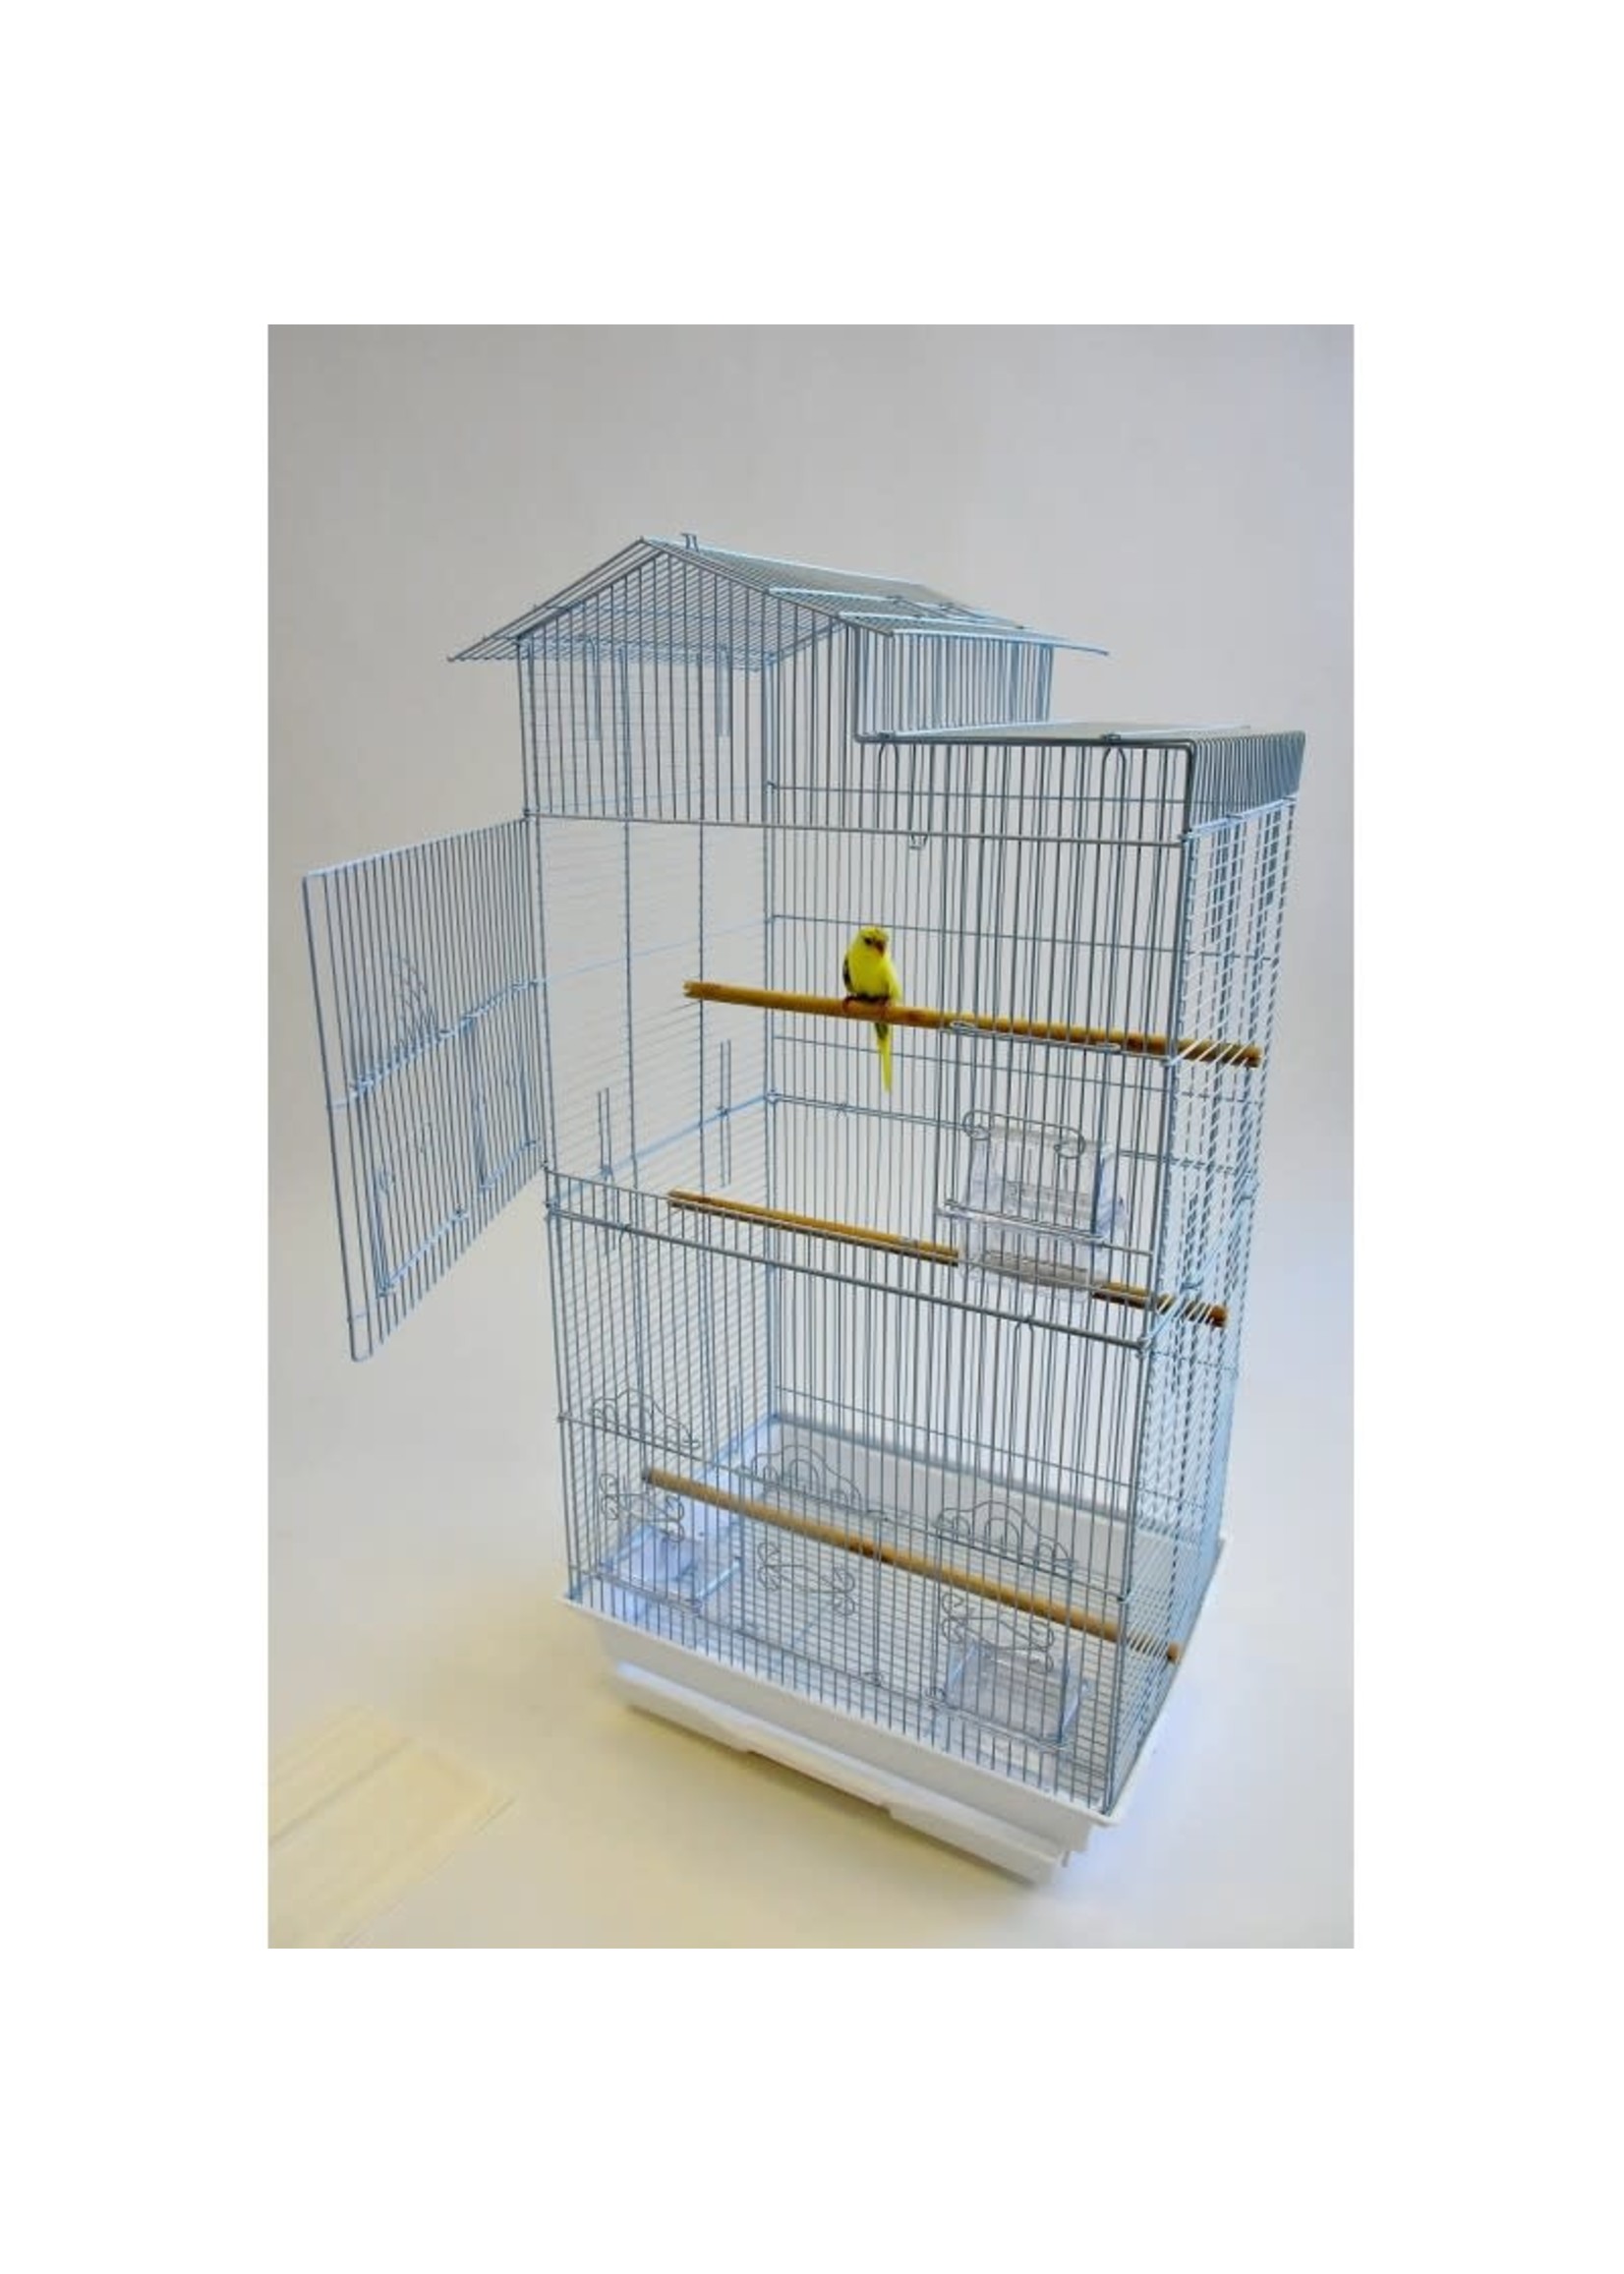 Glitter Pets GP (BS05) HOUSE STYLE SMALL BIRD CAGE 18x14x35